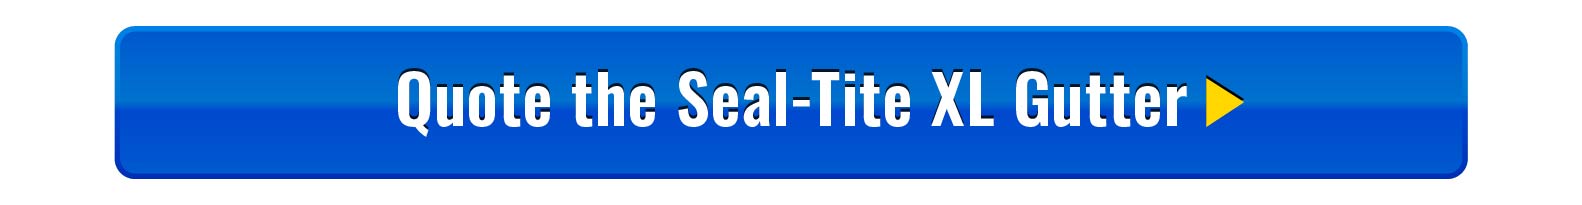 ME-Quote-the-Seal-Tite-XL-Gutter.jpg